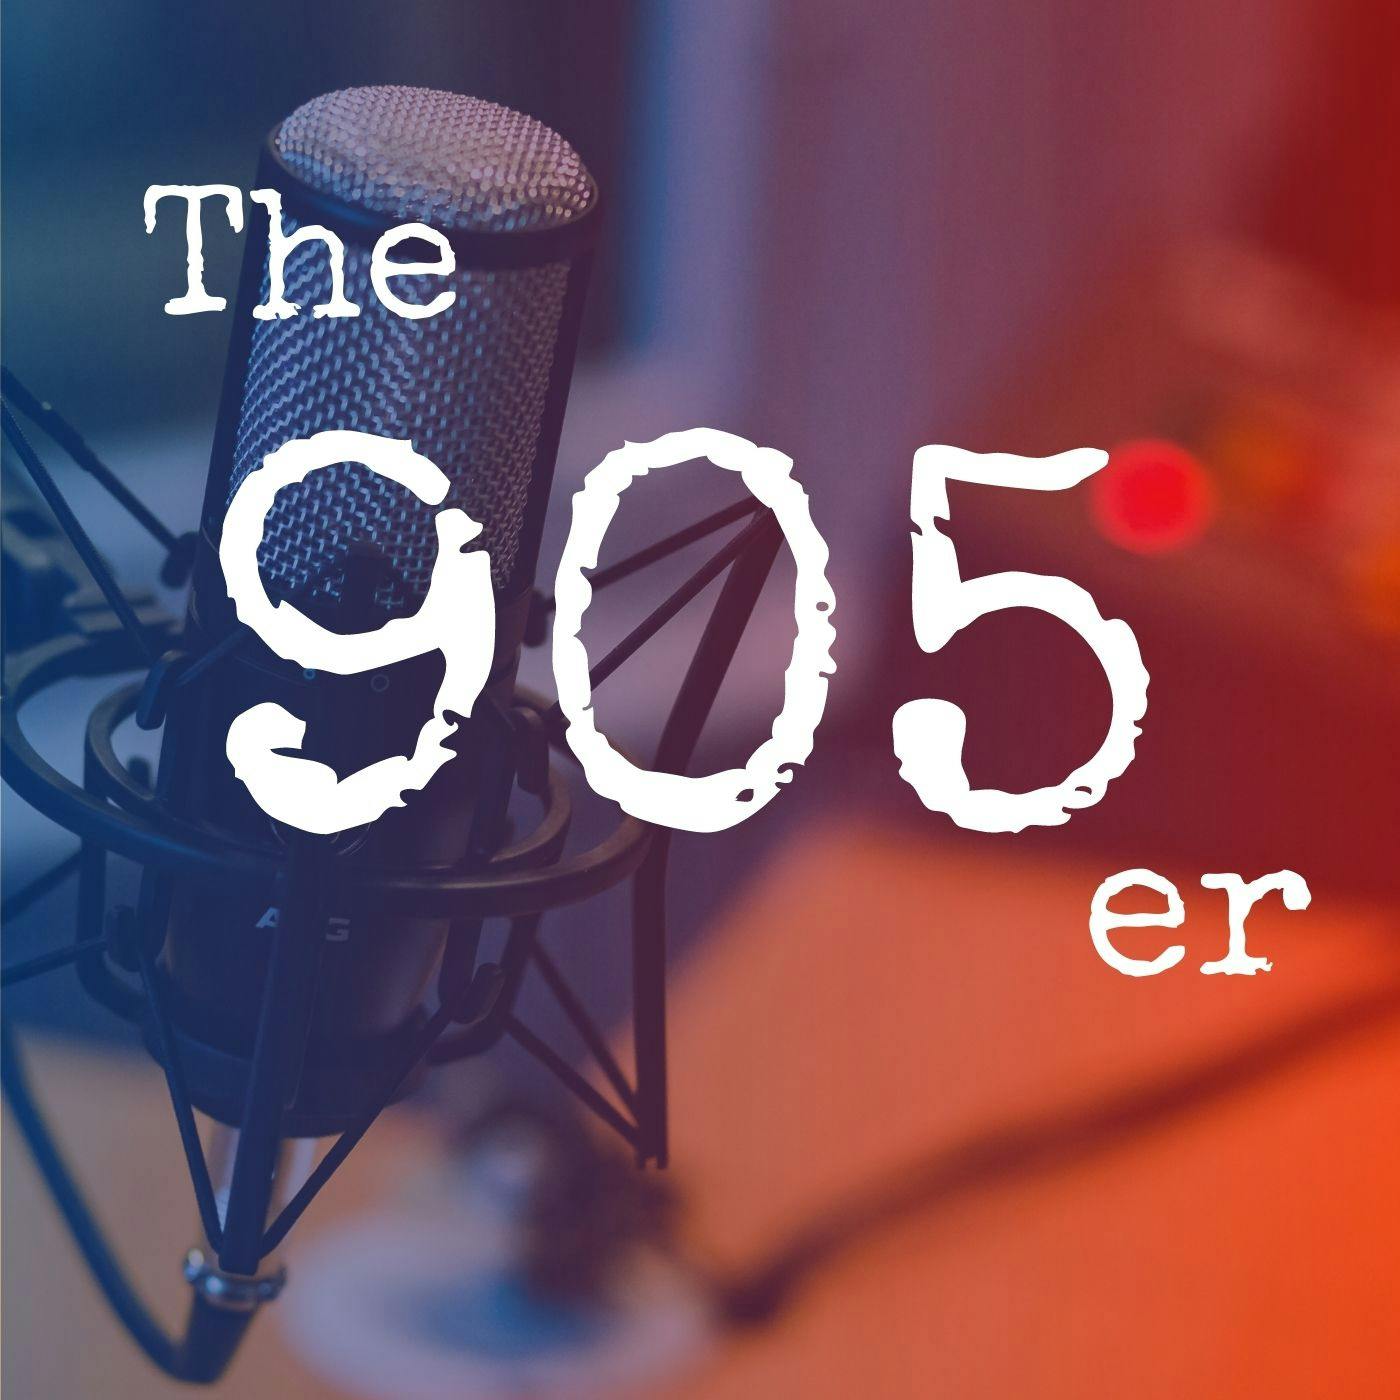 Thursday Roundup - Who‘s afraid of the 905er? Why won‘t CPC candidates speak about their platform?